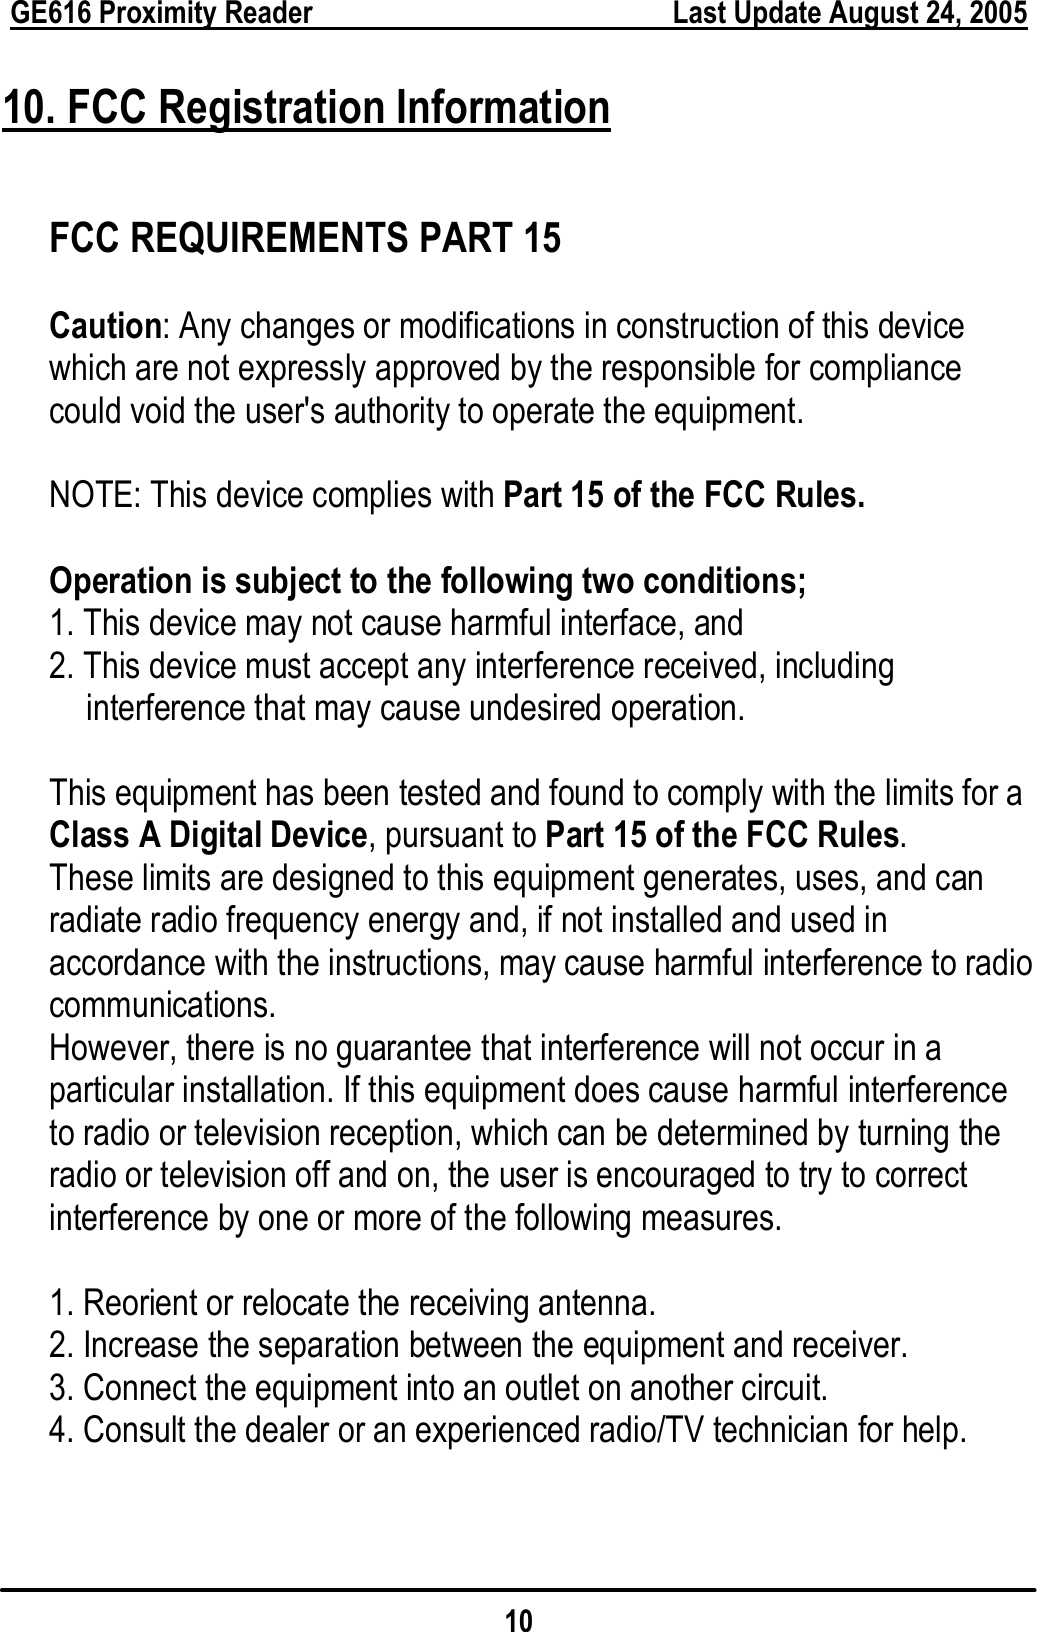  GE616 Proximity Reader        Last Update August 24, 2005 10 10. FCC Registration Information  FCC REQUIREMENTS PART 15  Caution: Any changes or modifications in construction of this device which are not expressly approved by the responsible for compliance could void the user&apos;s authority to operate the equipment.  NOTE: This device complies with Part 15 of the FCC Rules.  Operation is subject to the following two conditions; 1. This device may not cause harmful interface, and 2. This device must accept any interference received, including interference that may cause undesired operation.  This equipment has been tested and found to comply with the limits for a Class A Digital Device, pursuant to Part 15 of the FCC Rules.  These limits are designed to this equipment generates, uses, and can radiate radio frequency energy and, if not installed and used in accordance with the instructions, may cause harmful interference to radio communications. However, there is no guarantee that interference will not occur in a particular installation. If this equipment does cause harmful interference to radio or television reception, which can be determined by turning the radio or television off and on, the user is encouraged to try to correct interference by one or more of the following measures.  1. Reorient or relocate the receiving antenna. 2. Increase the separation between the equipment and receiver. 3. Connect the equipment into an outlet on another circuit. 4. Consult the dealer or an experienced radio/TV technician for help. 